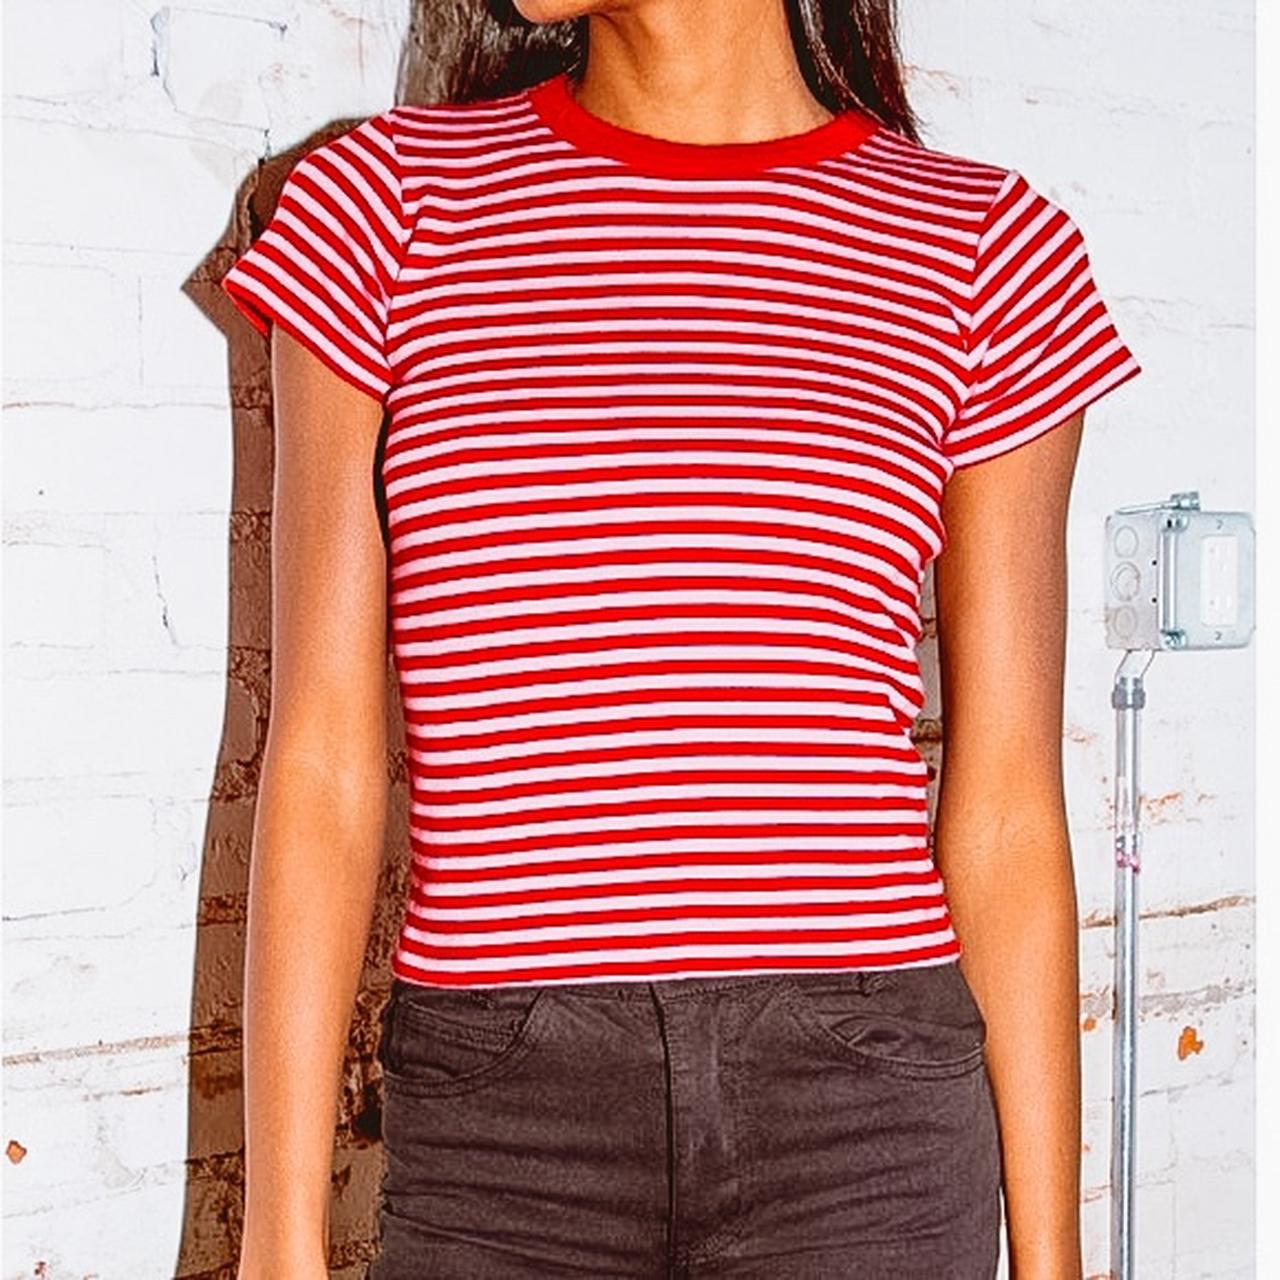 brandy melville red & white striped hailie top!, one